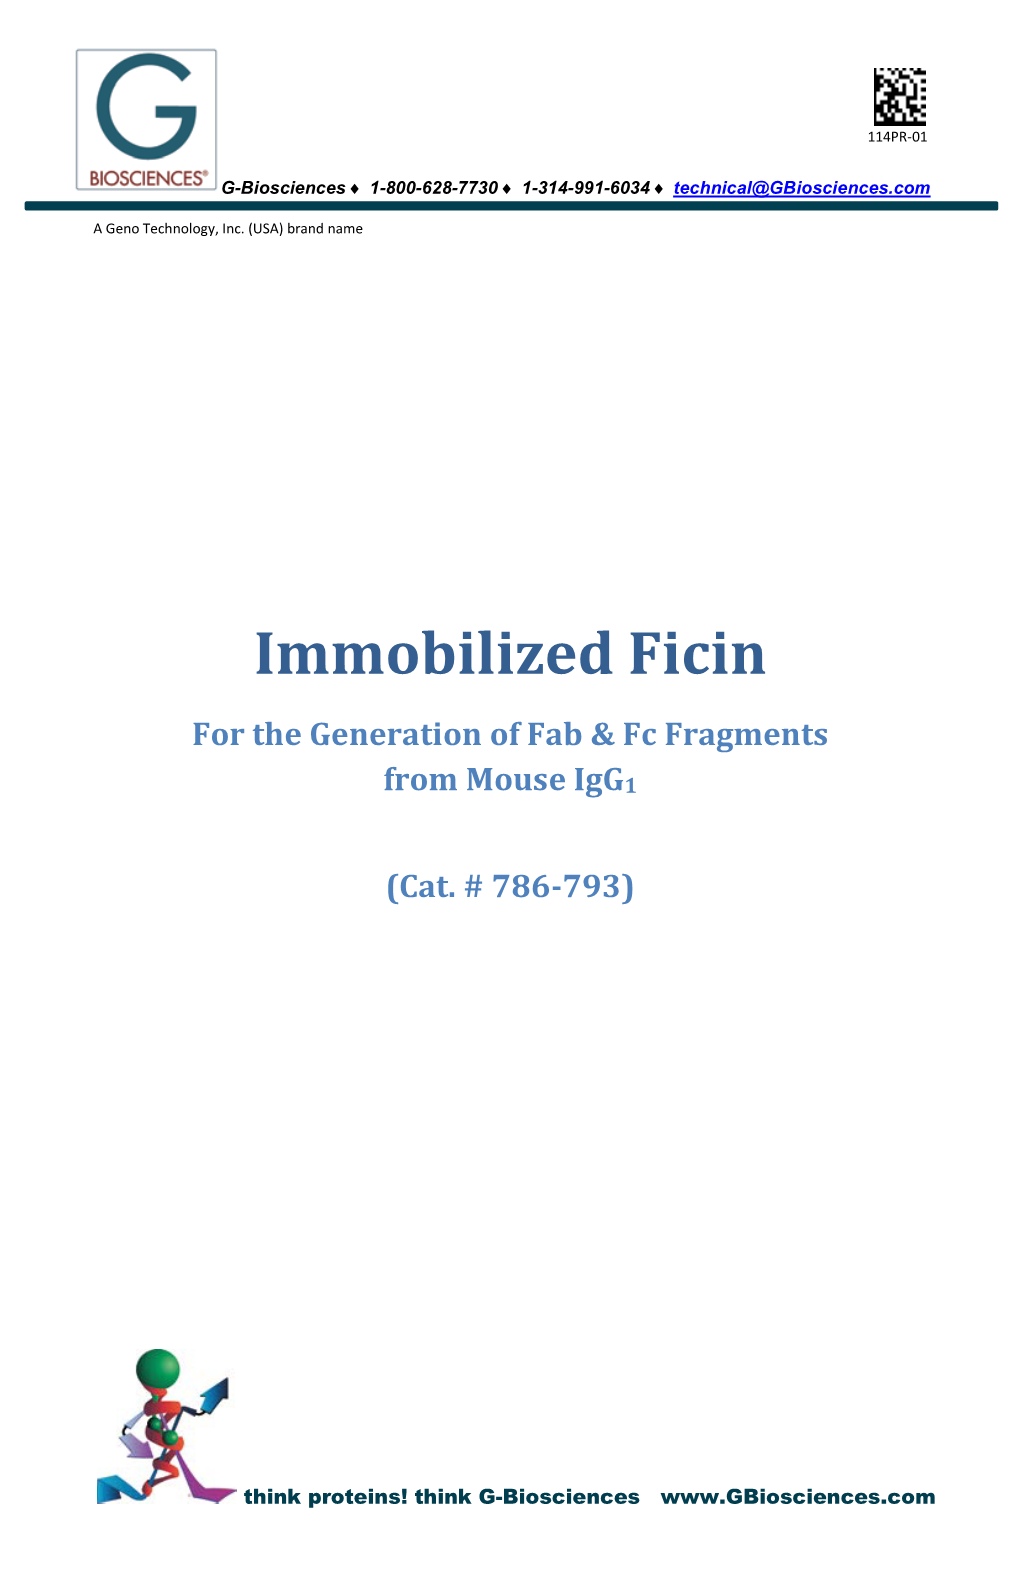 Immobilized Ficin for the Generation of Fab & Fc Fragments from Mouse Igg1